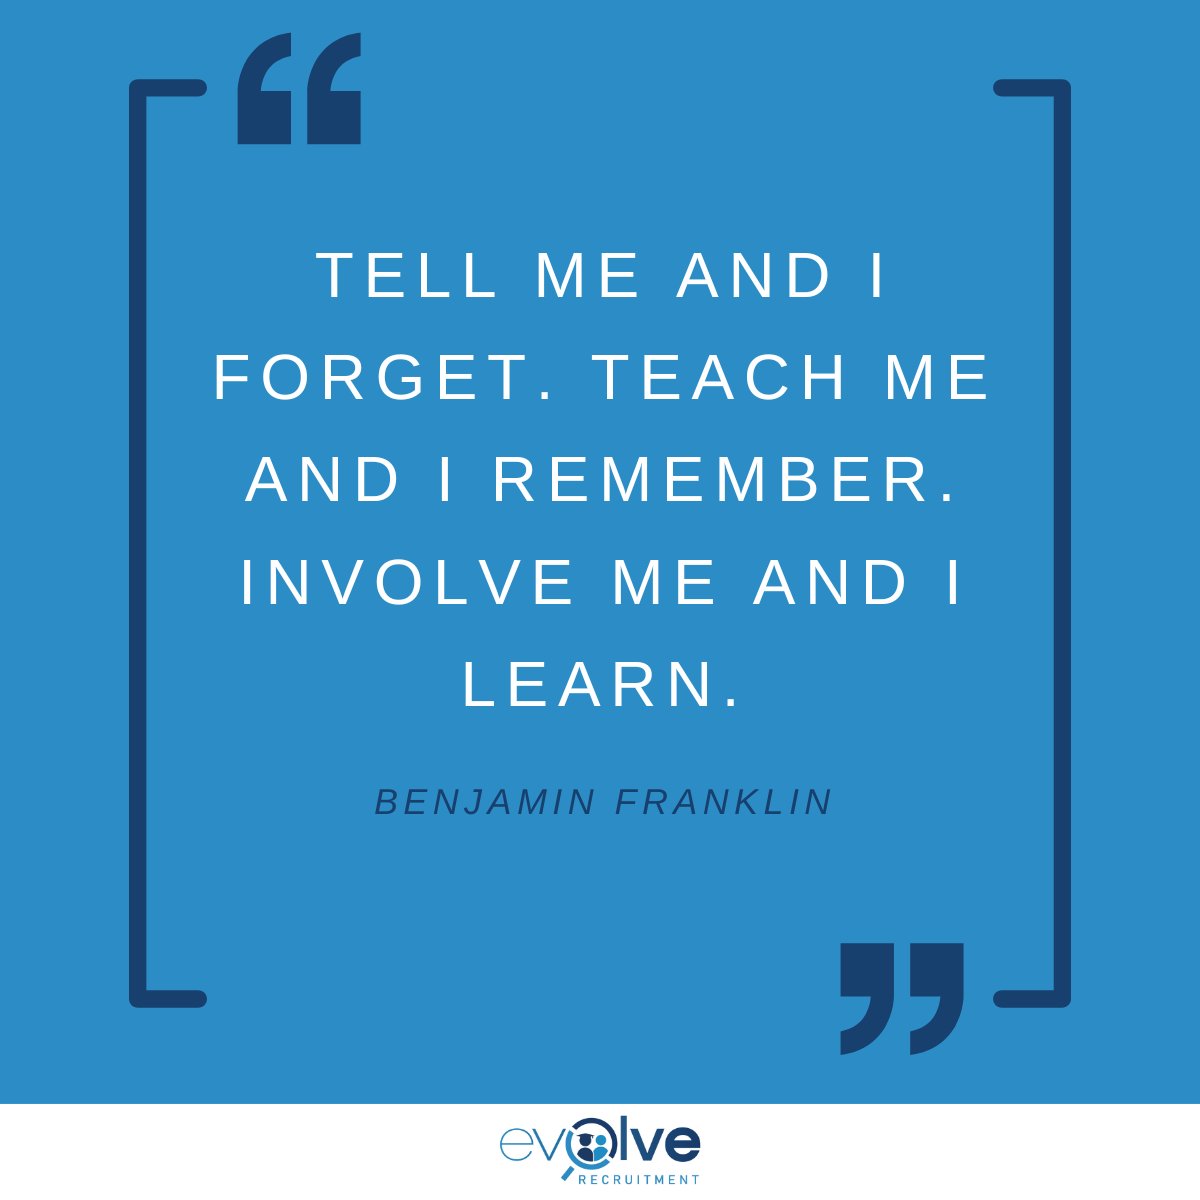 Engage, involve, and empower for lasting learning! With hands-on experiences, students don't just remember – they truly learn.

#QuoteOfTheDay #EvolveRecruitment #Teaching #JobOpportunities #StudentEngagement #ActiveLearning #Empowerment